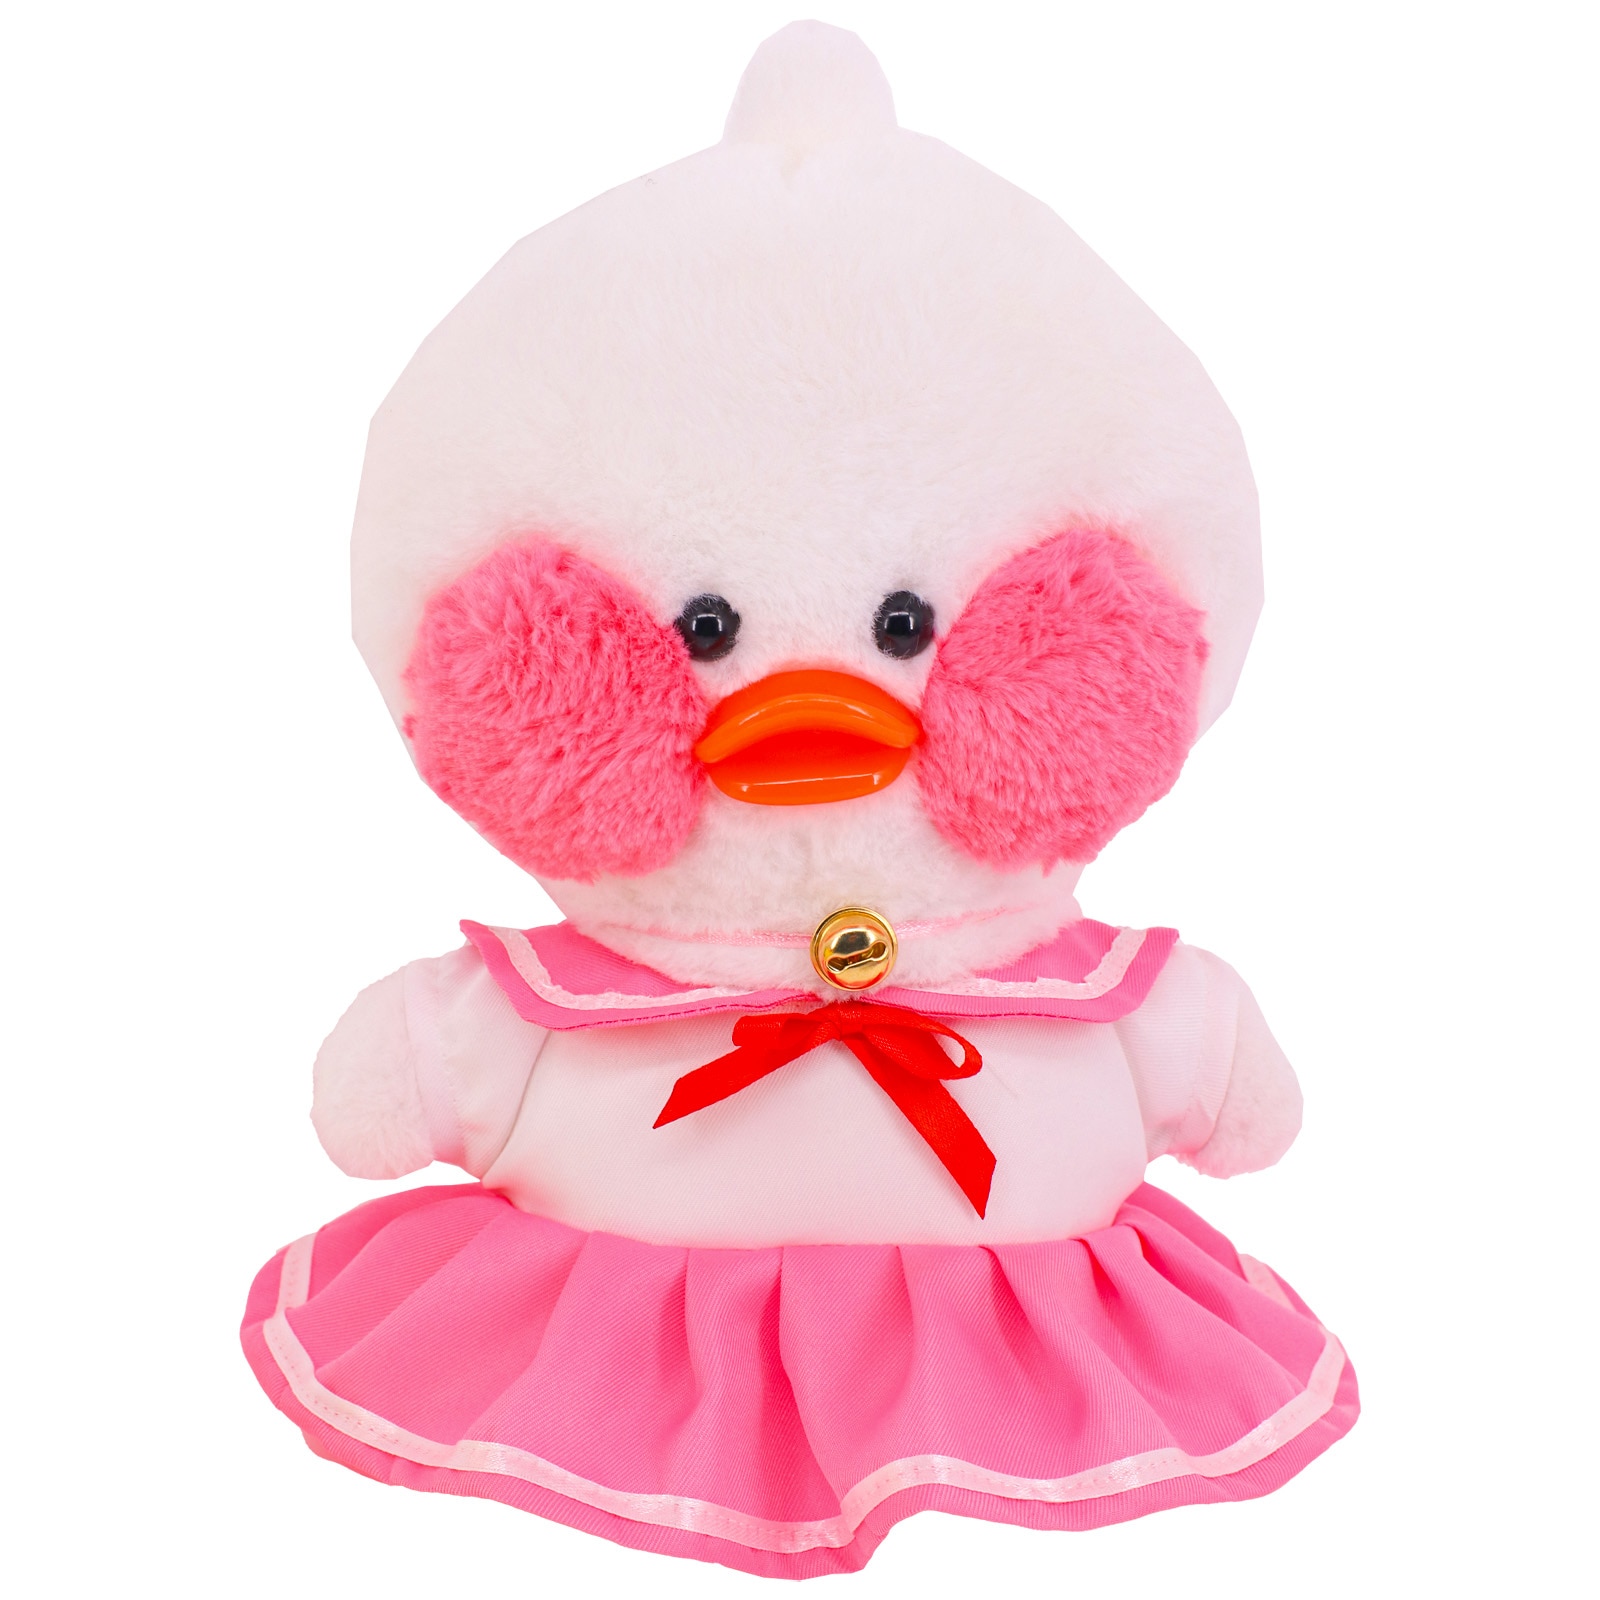 30 LalaFanfan Duck Pink Series Clothes Accessories Stuffed Soft Duck Figure Toy Animal Birthday Girl Gift 3 - Lalafanfan Shop